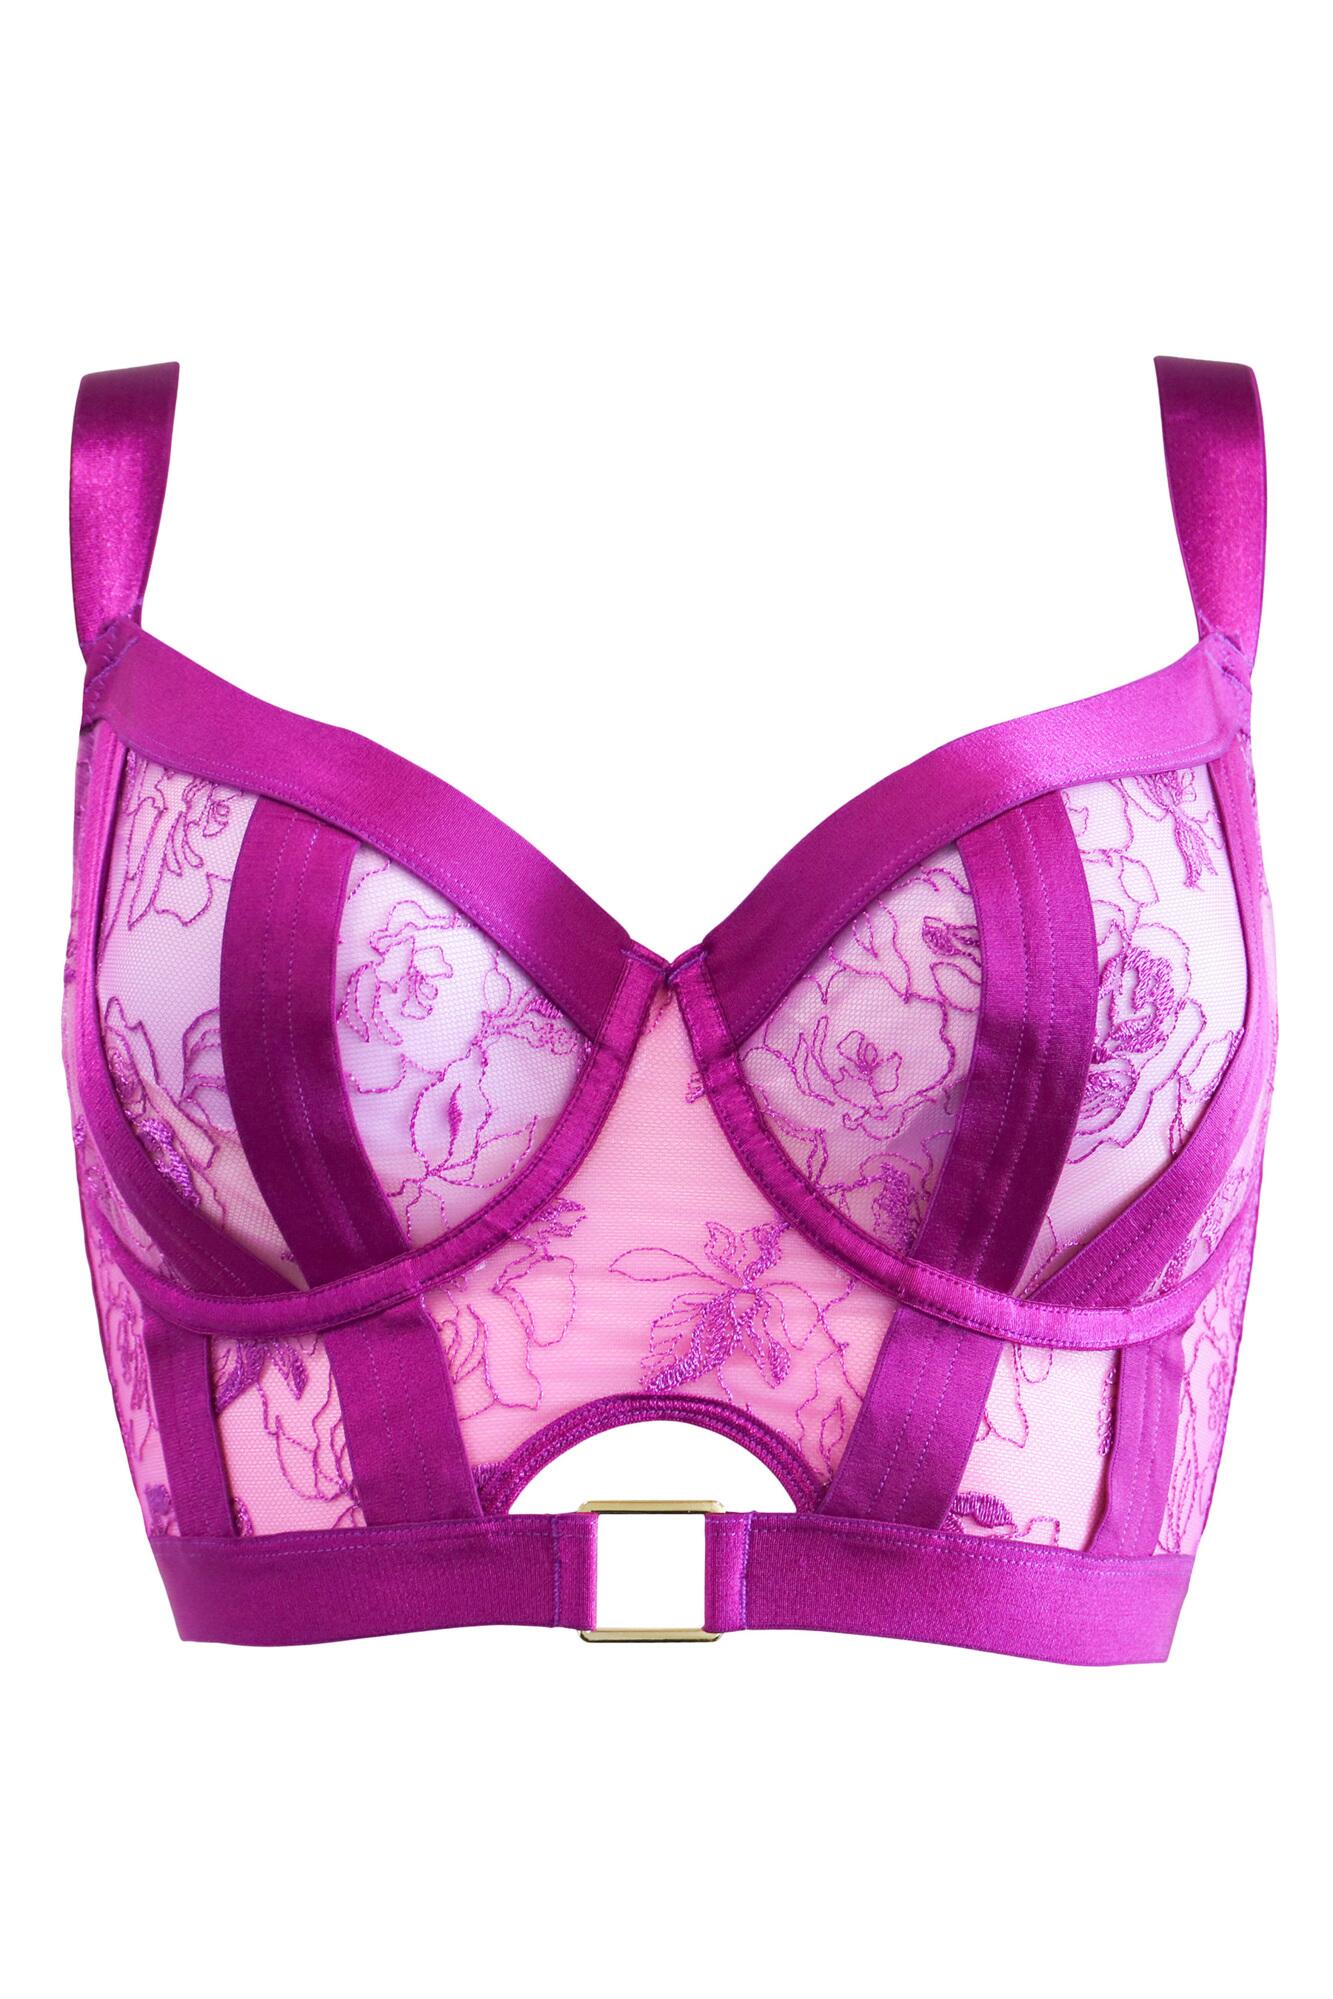 Amour 1502 Underwired Bra Black/Chartreuse 30-44 D-J Clearance.....Pour Moi